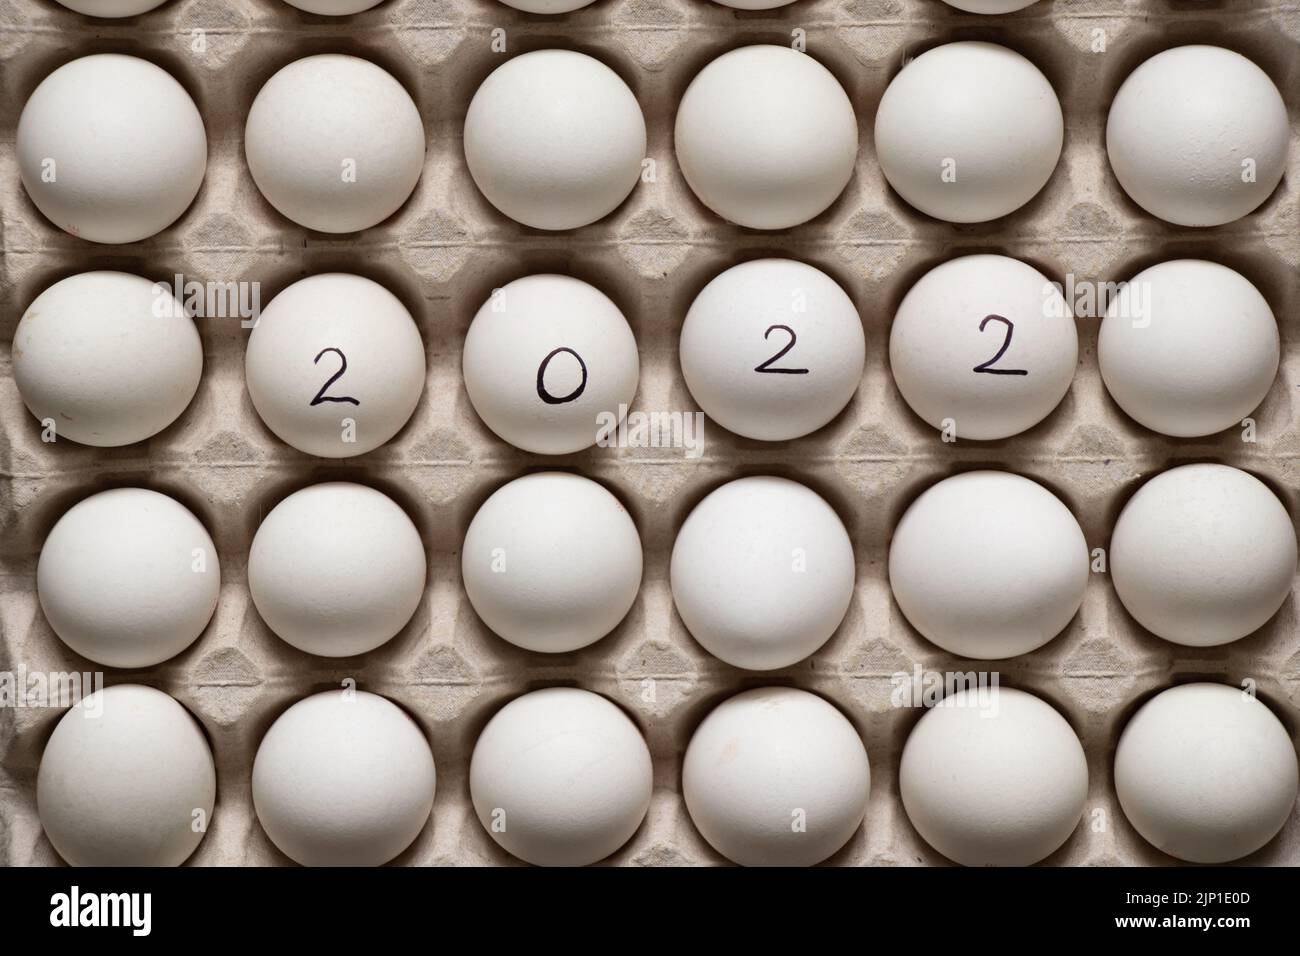 2022 is written on white chicken eggs in a paper tray, the year 2022 is written on eggs Stock Photo